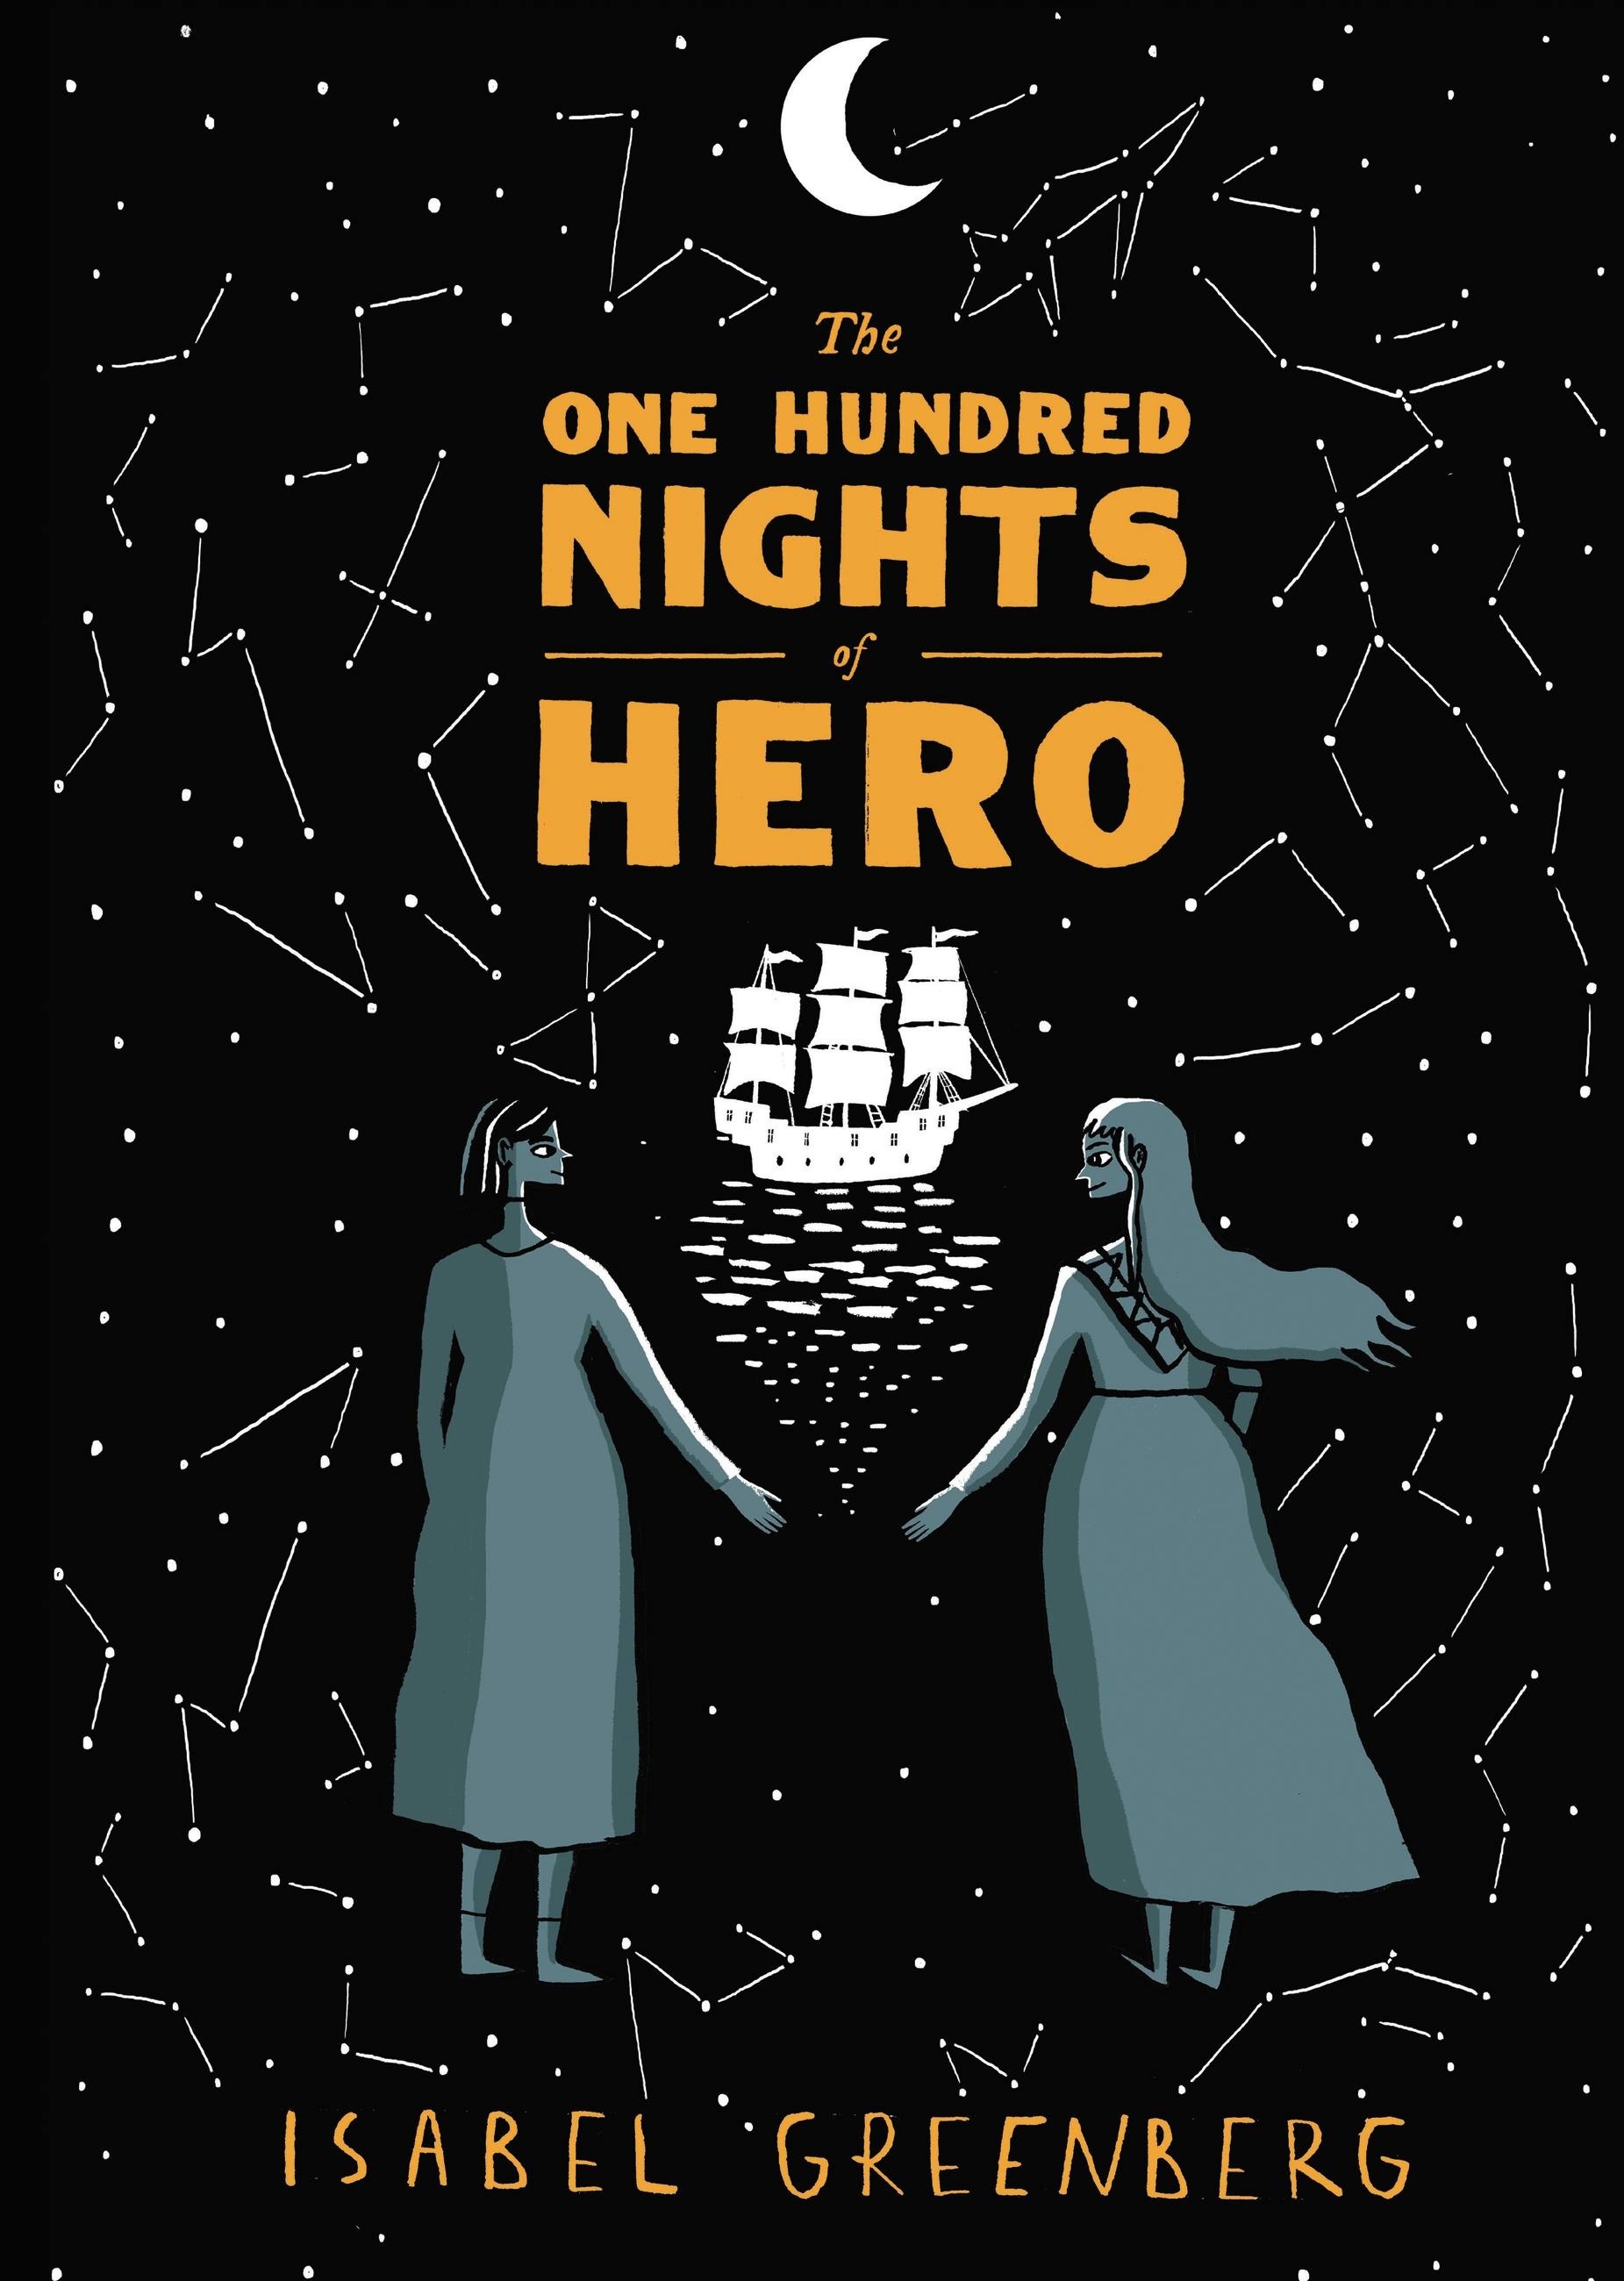 Isabel Greenberg: The One Hundred Nights of Hero (GraphicNovel, 2016, Little, Brown and Company)